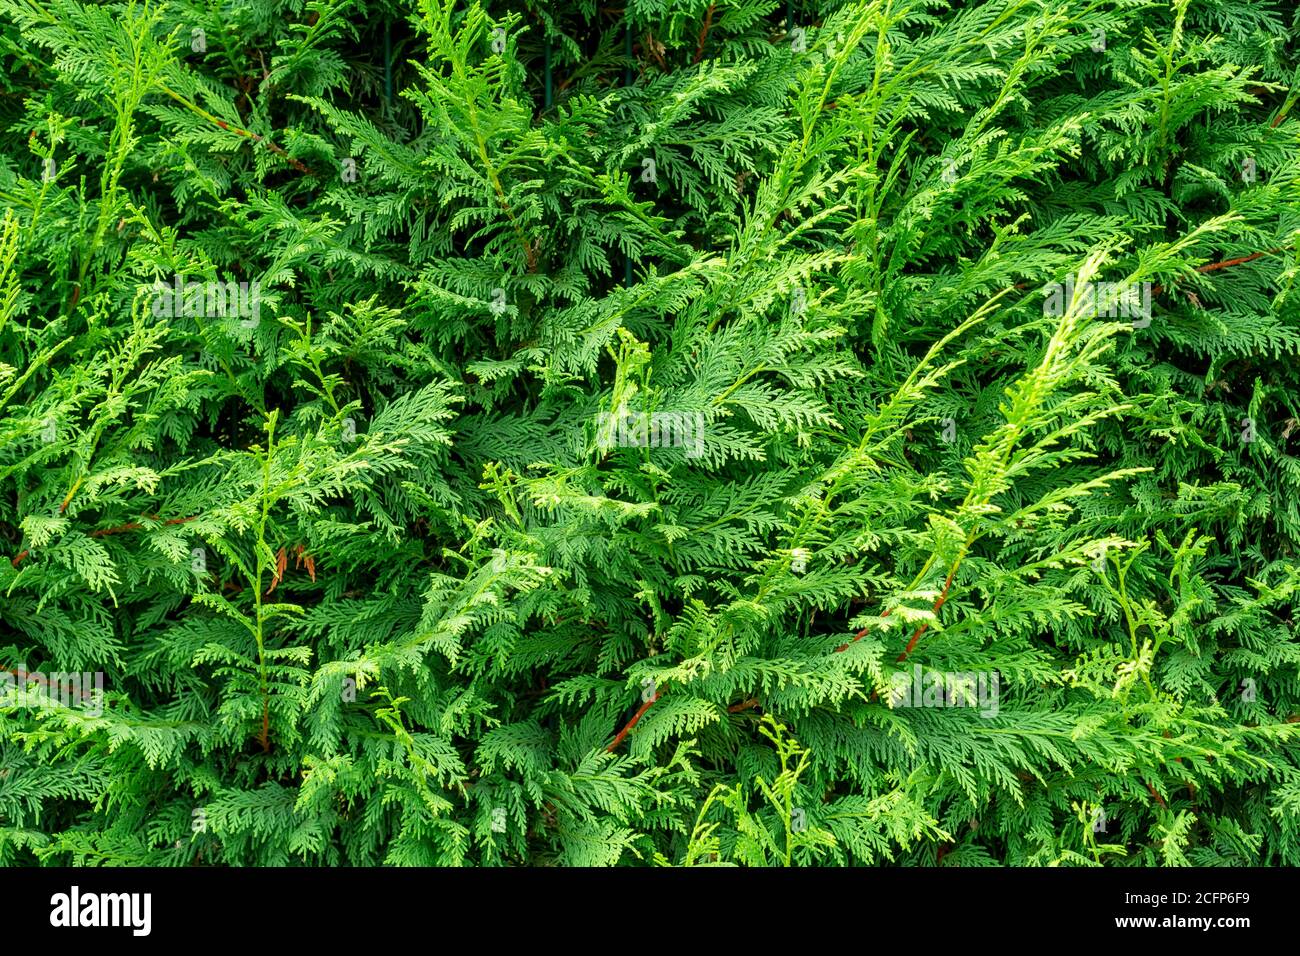 Cedar hedge texture. Beautiful green branches of thuja close up Stock Photo